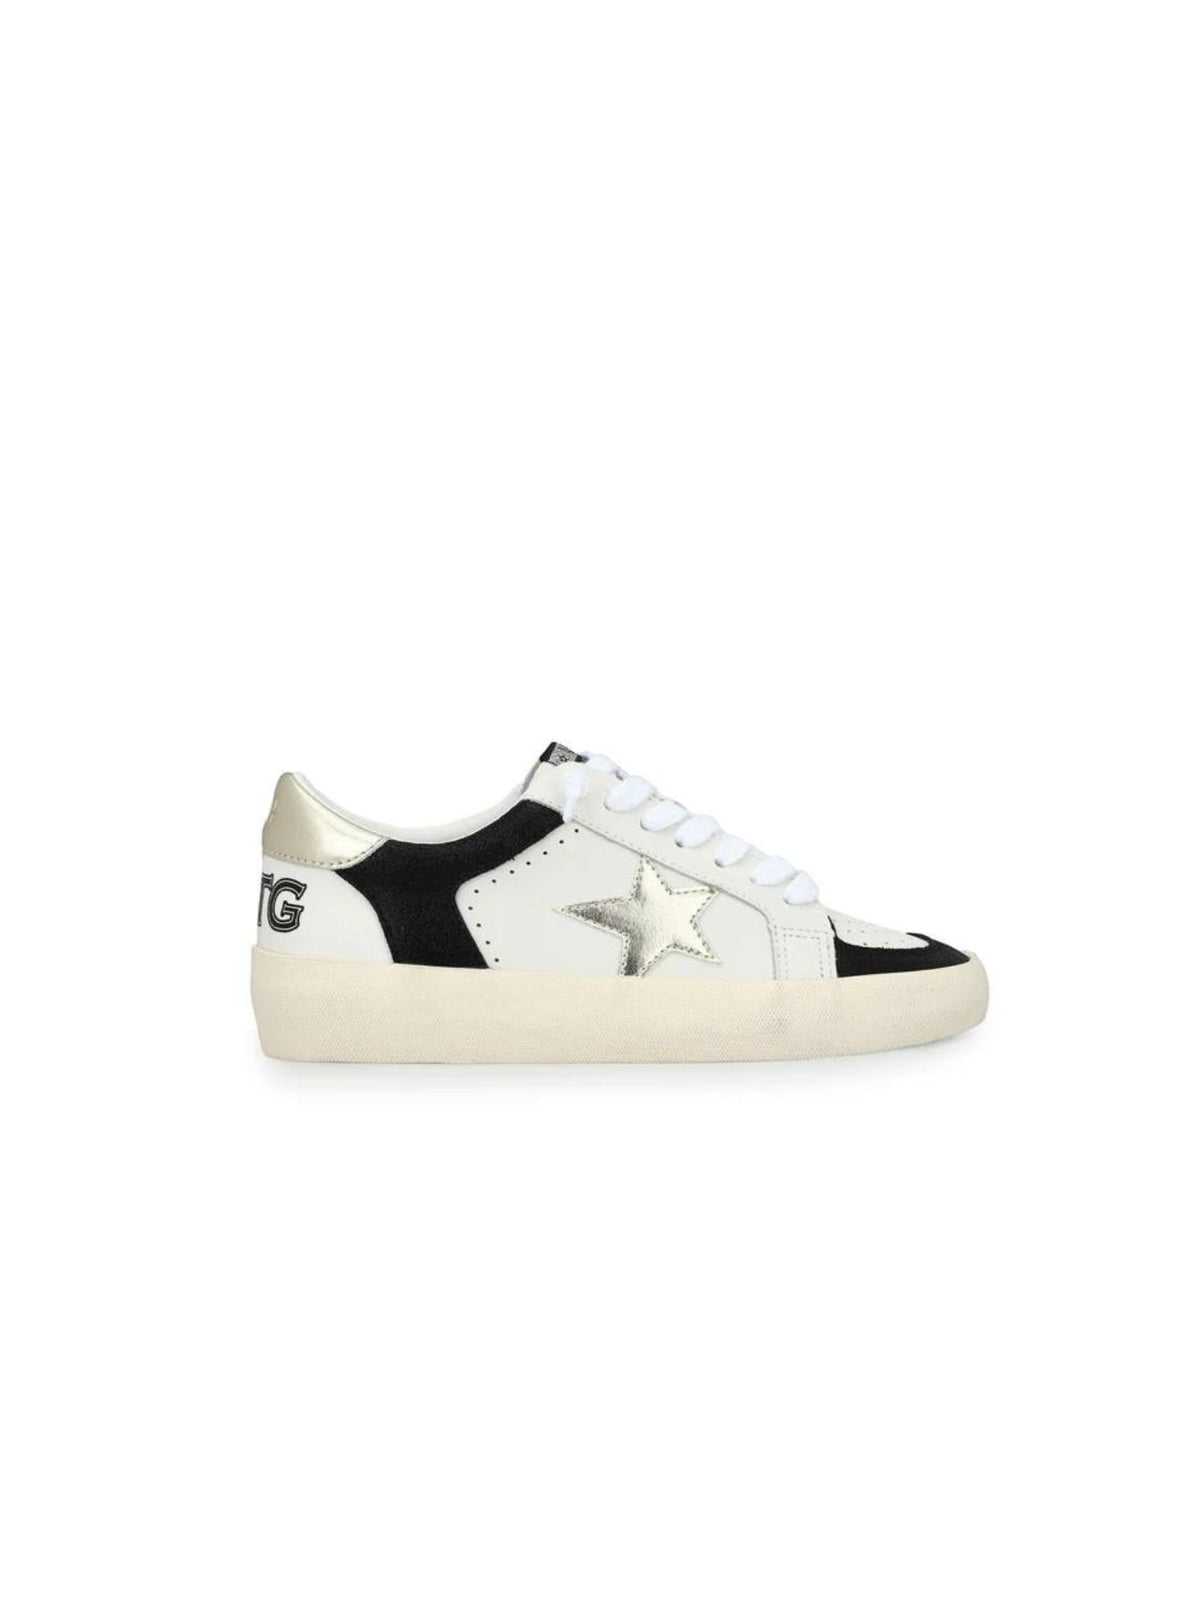 vintage havana reflex 24 colorblock mix star sneakers in black gold and white-side with star